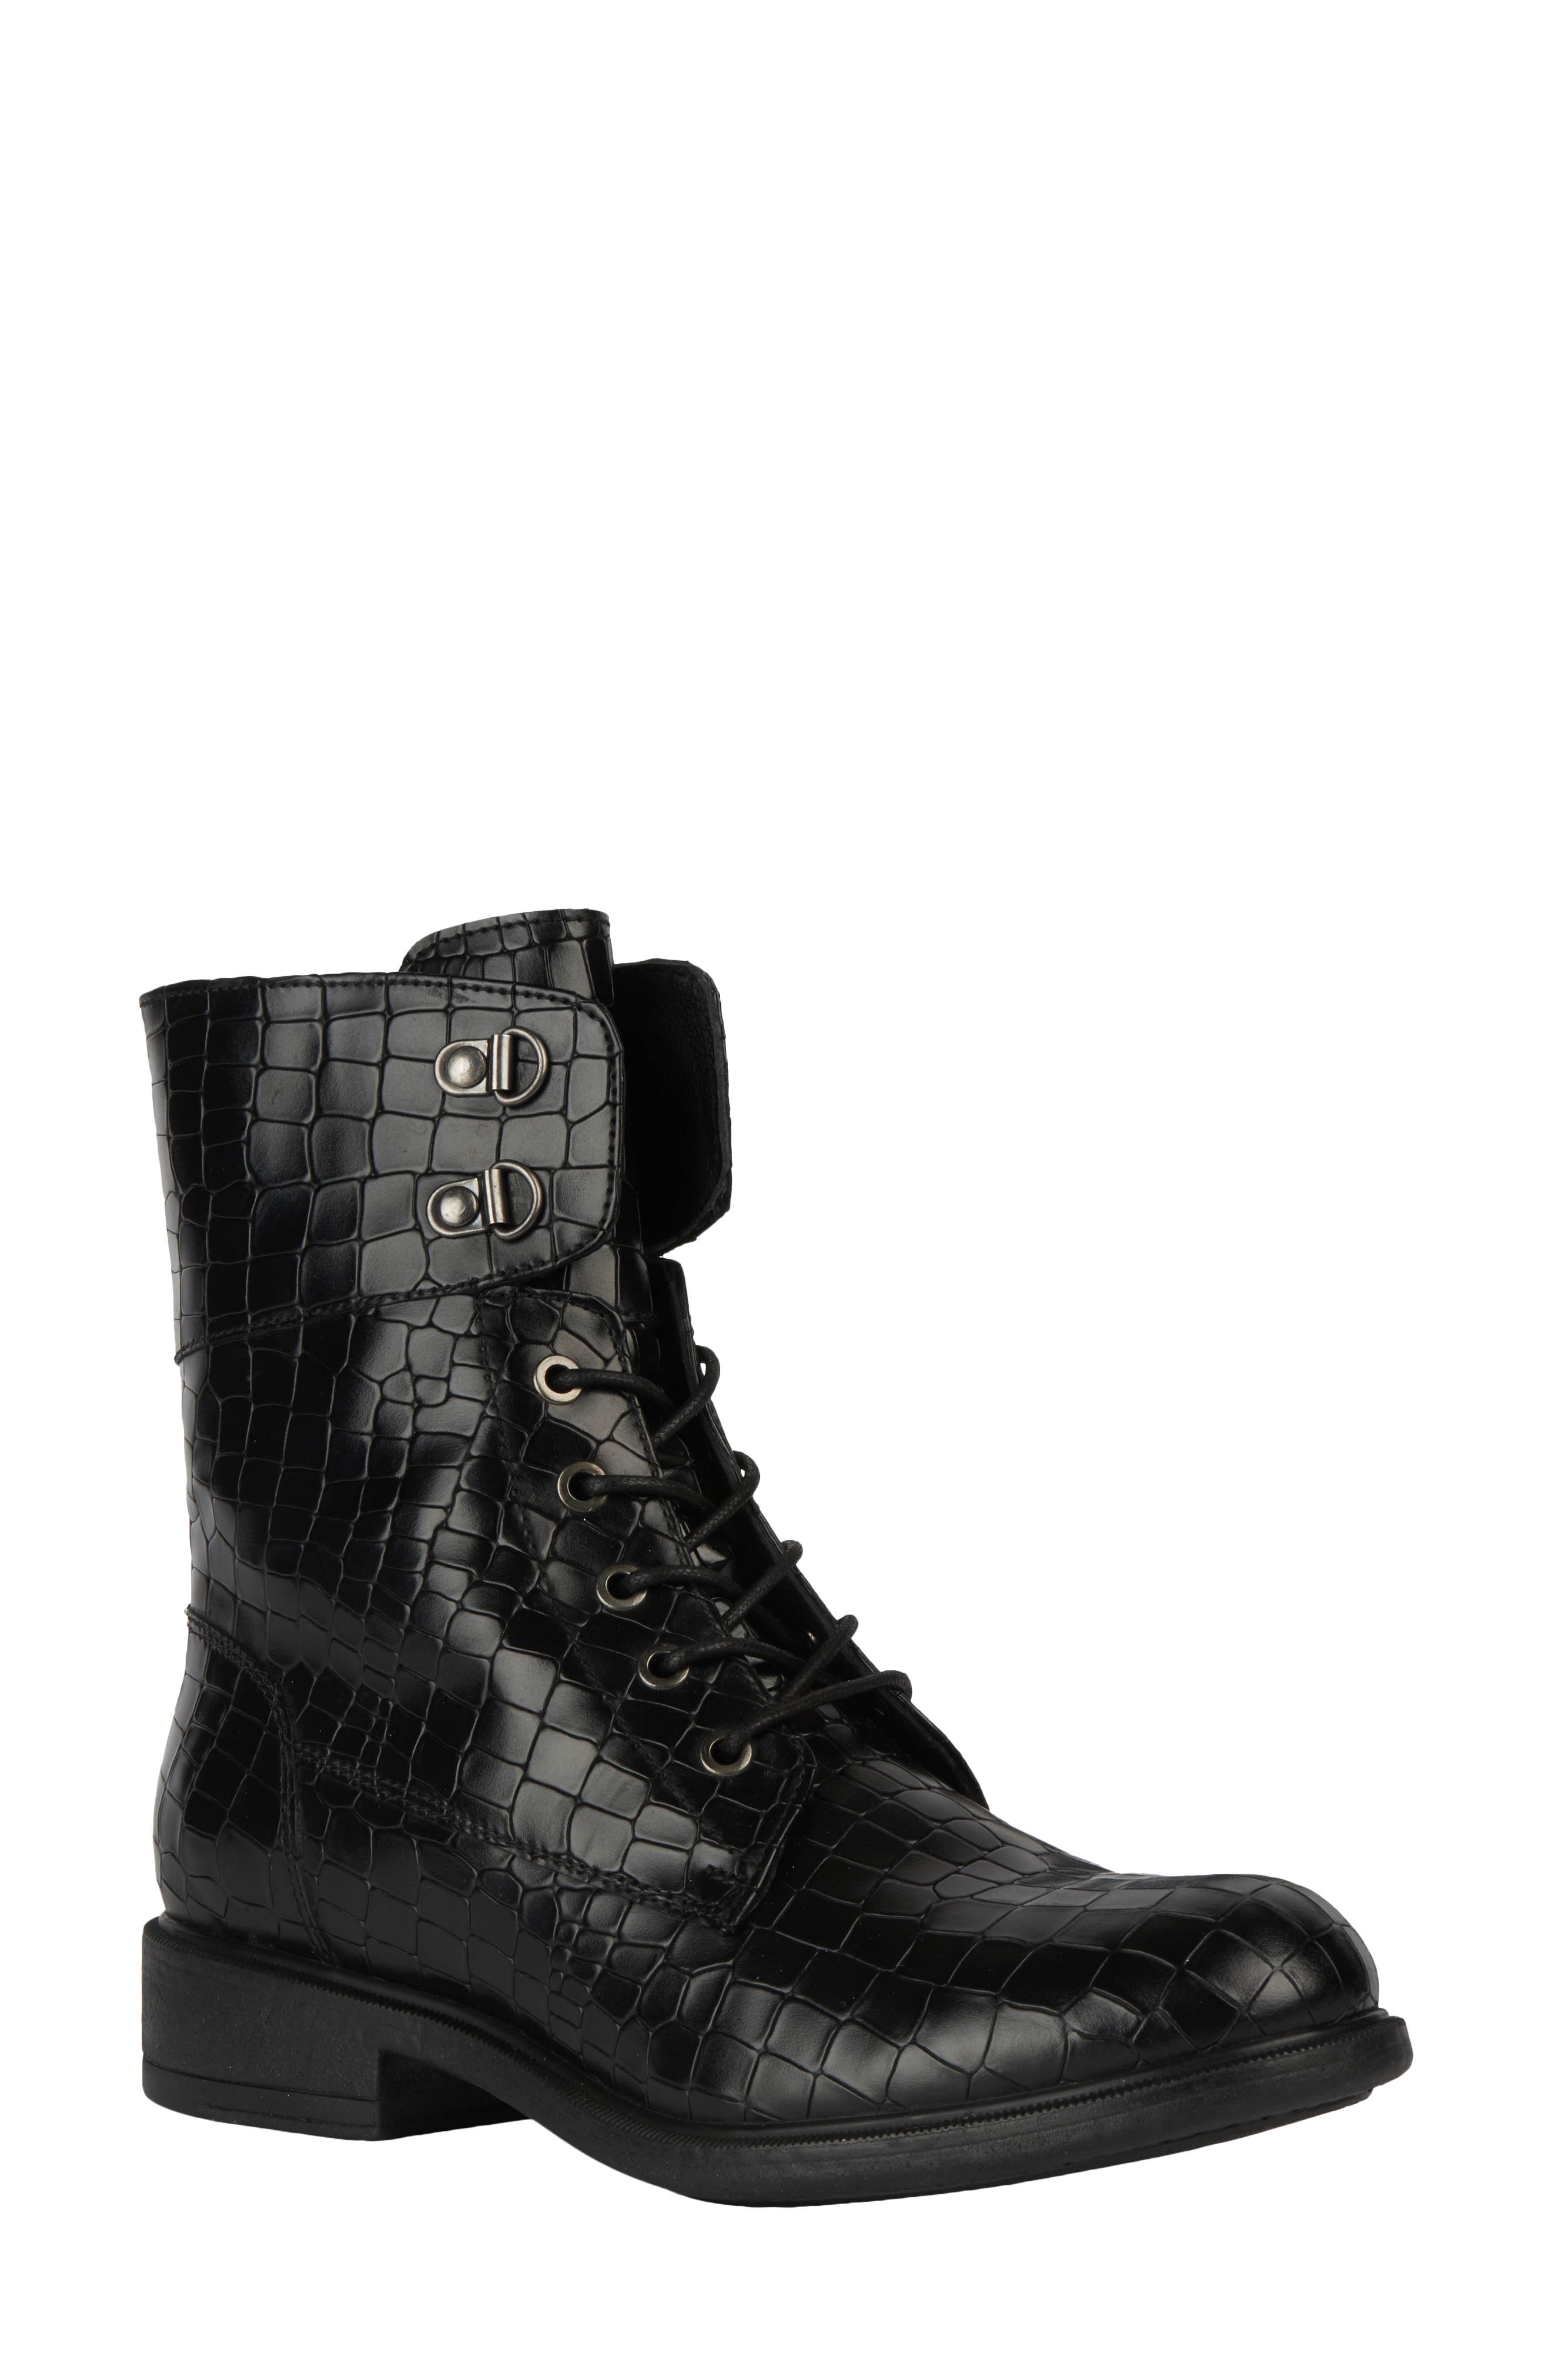 topshop axle boots